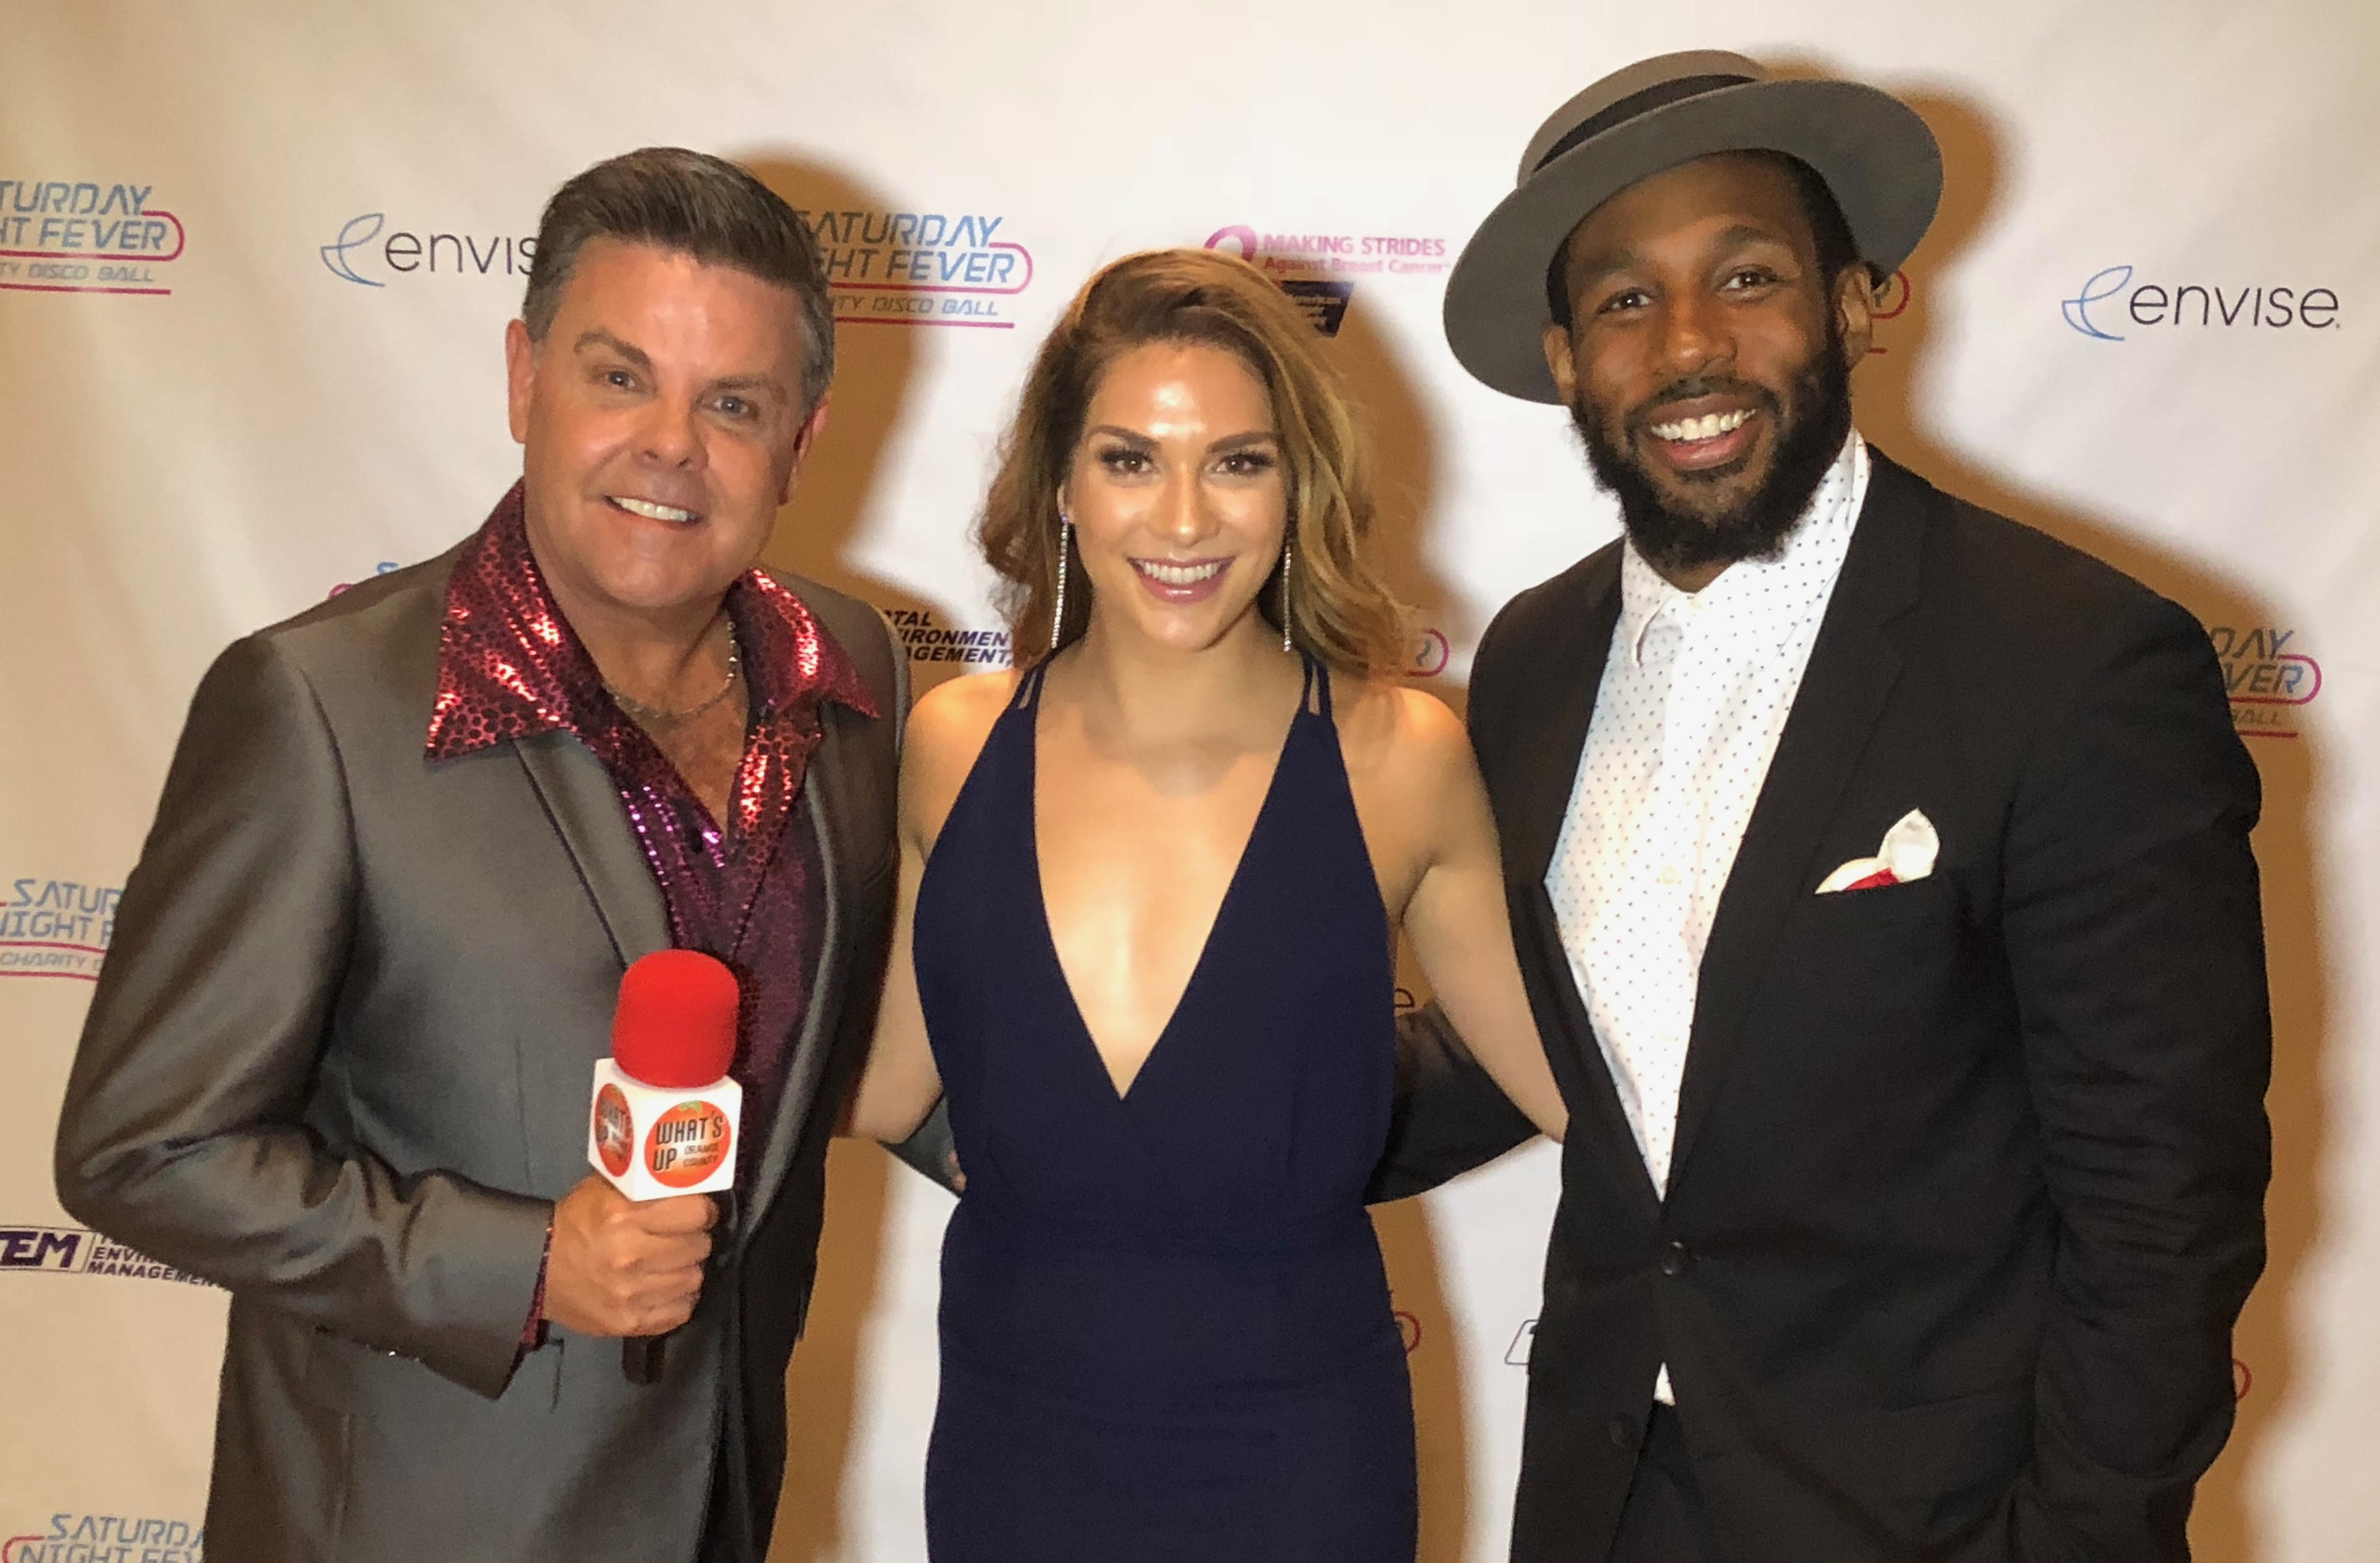 Scott with Allison Holker Boss and Stephen “tWitch” Boss from The Ellen DeGeneres Show at American Cancer Society’s OC Saturday Night Fever charity ball. Scott was the emcee and  “tWitch” performed.